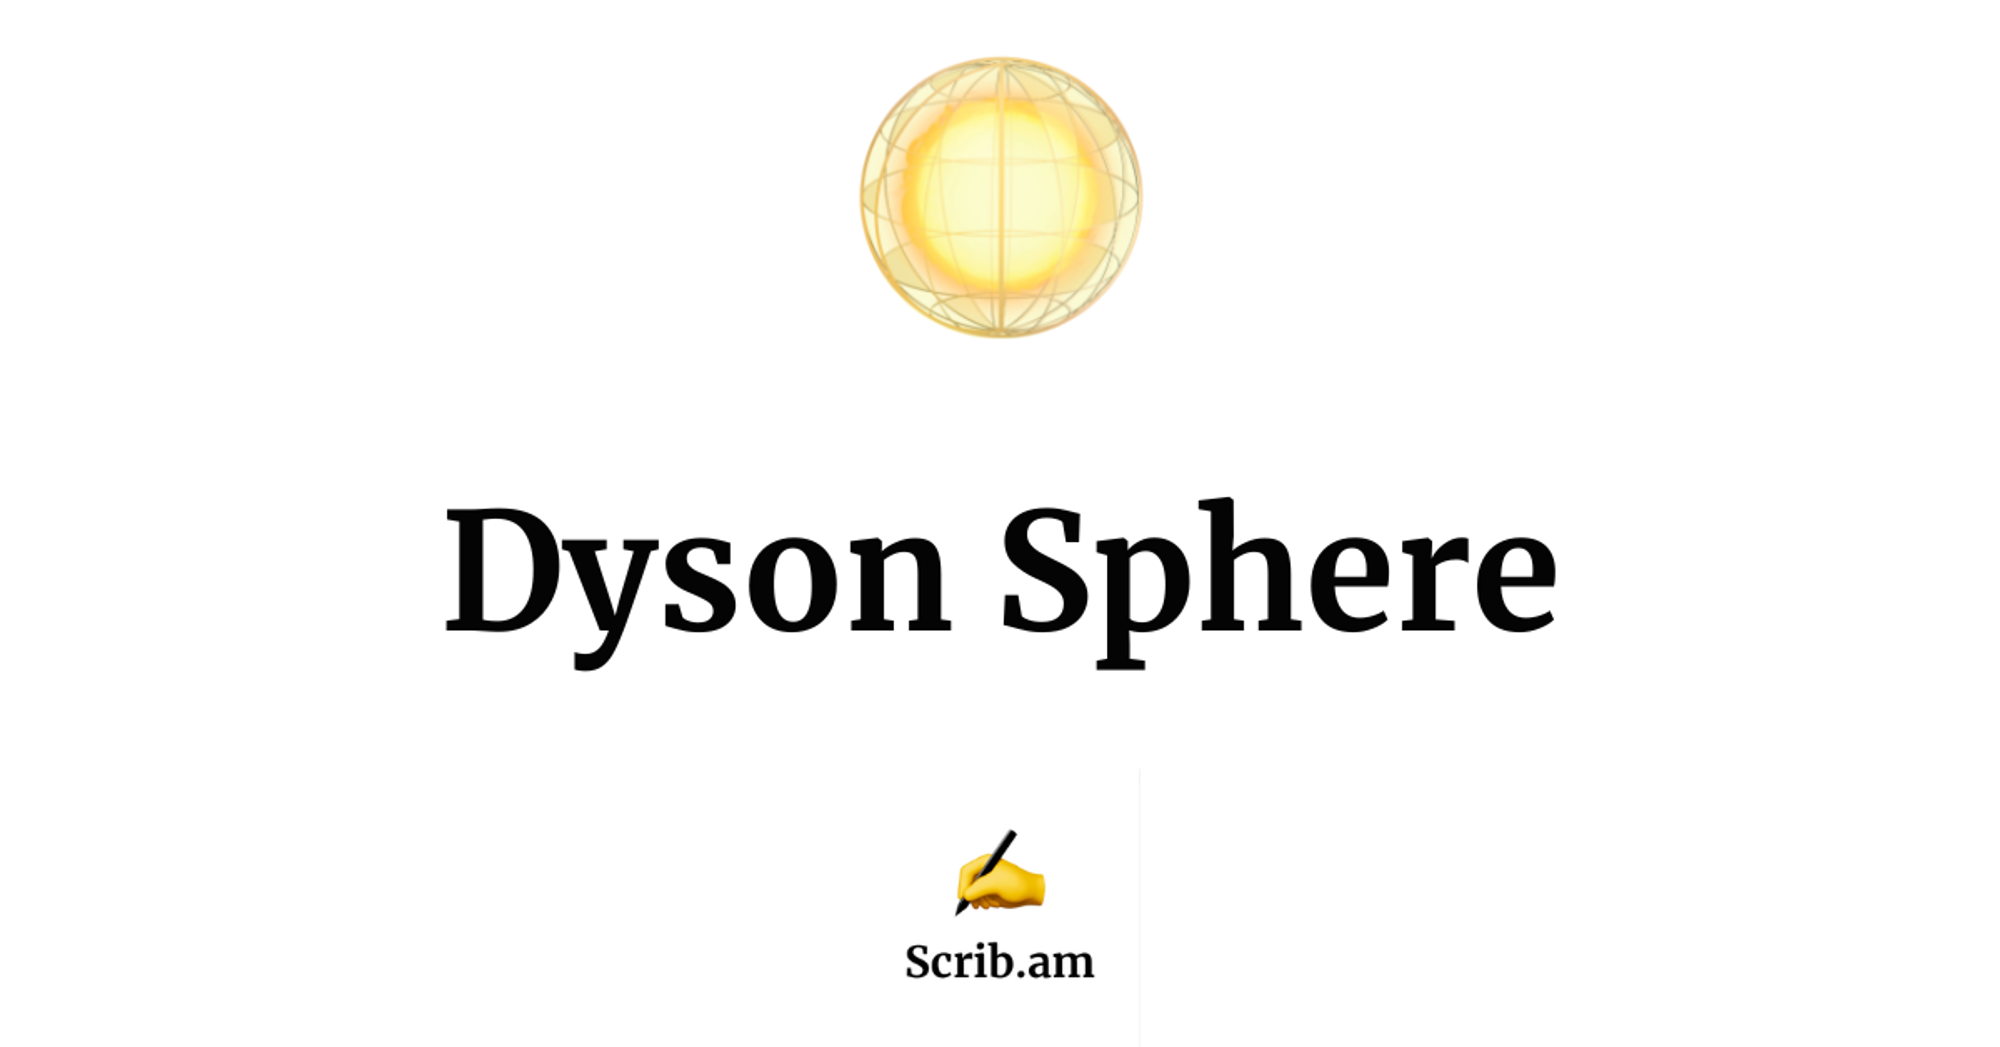 Scrib.am Dyson Sphere.png